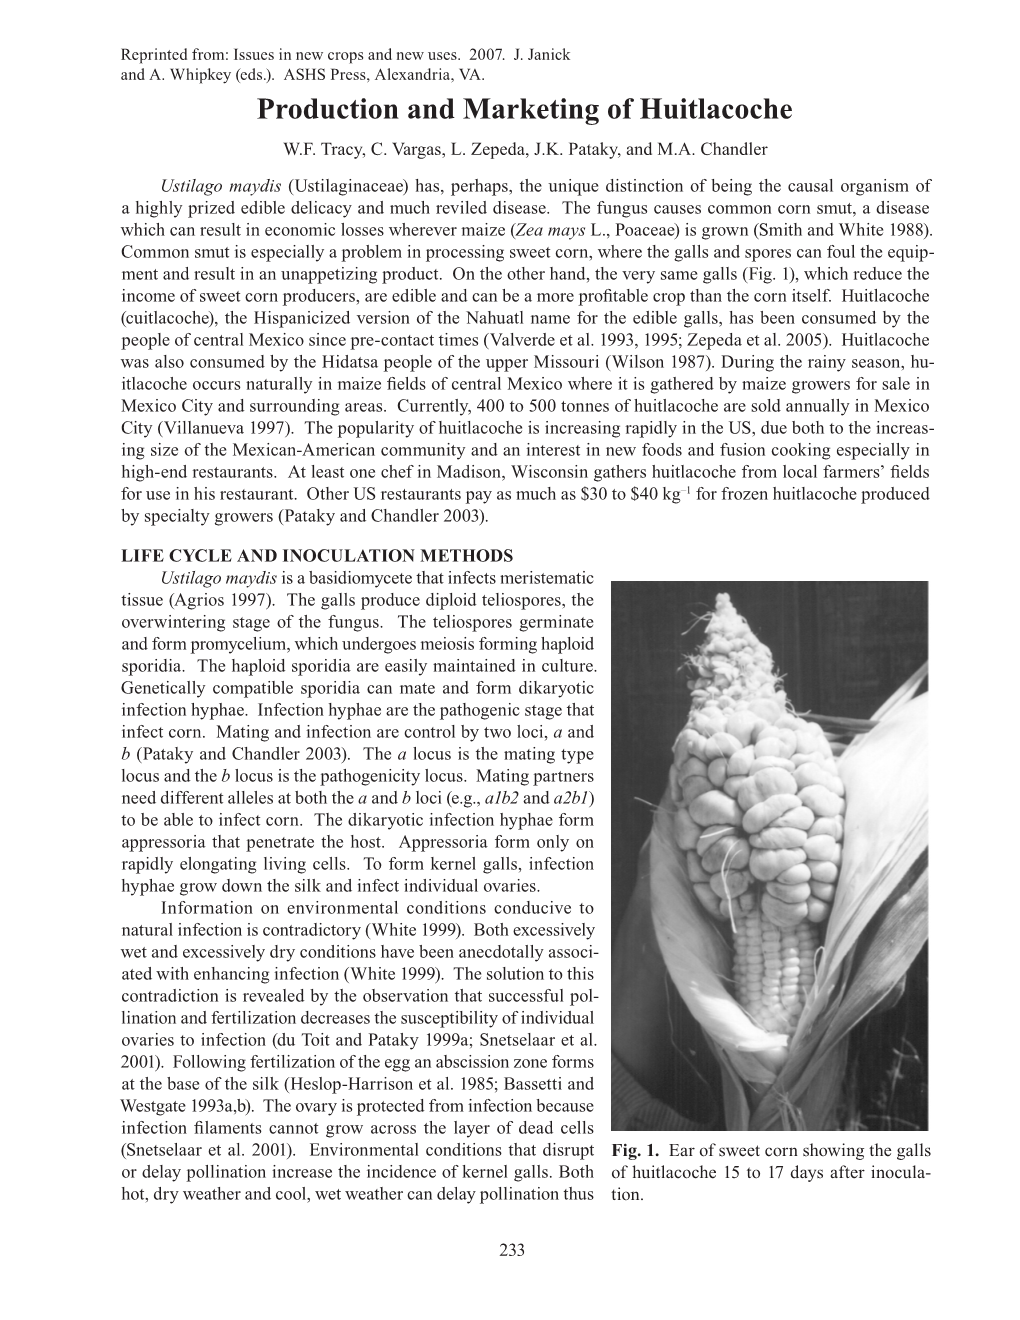 Production and Marketing of Huitlacoche W.F